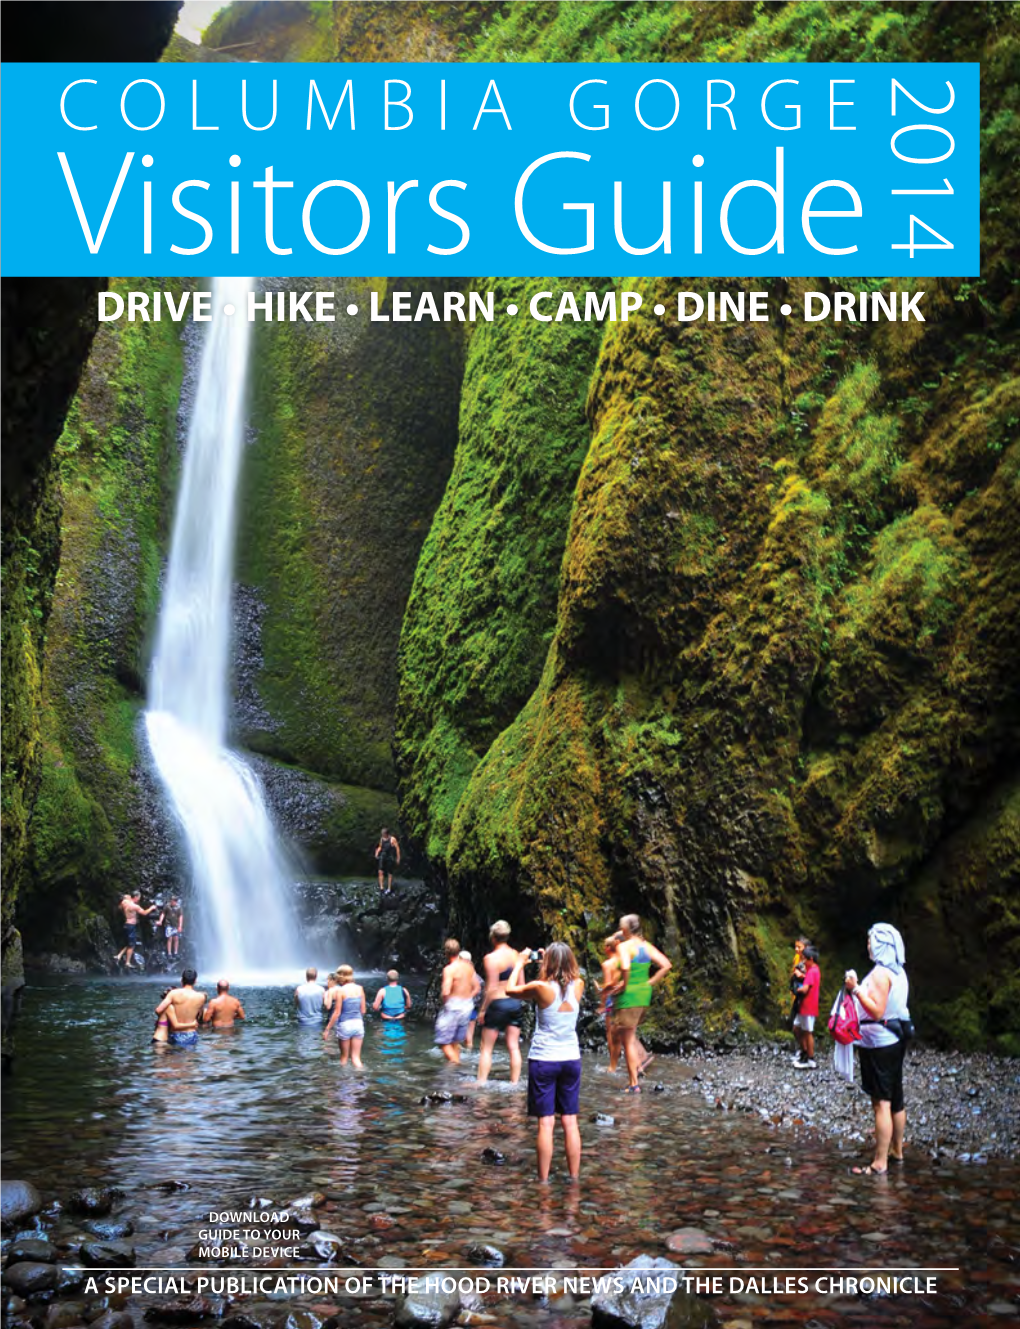 COLUMBIA GORGE Visitors Guide DRIVE • HIKE • LEARN • CAMP • DINE • DRINK